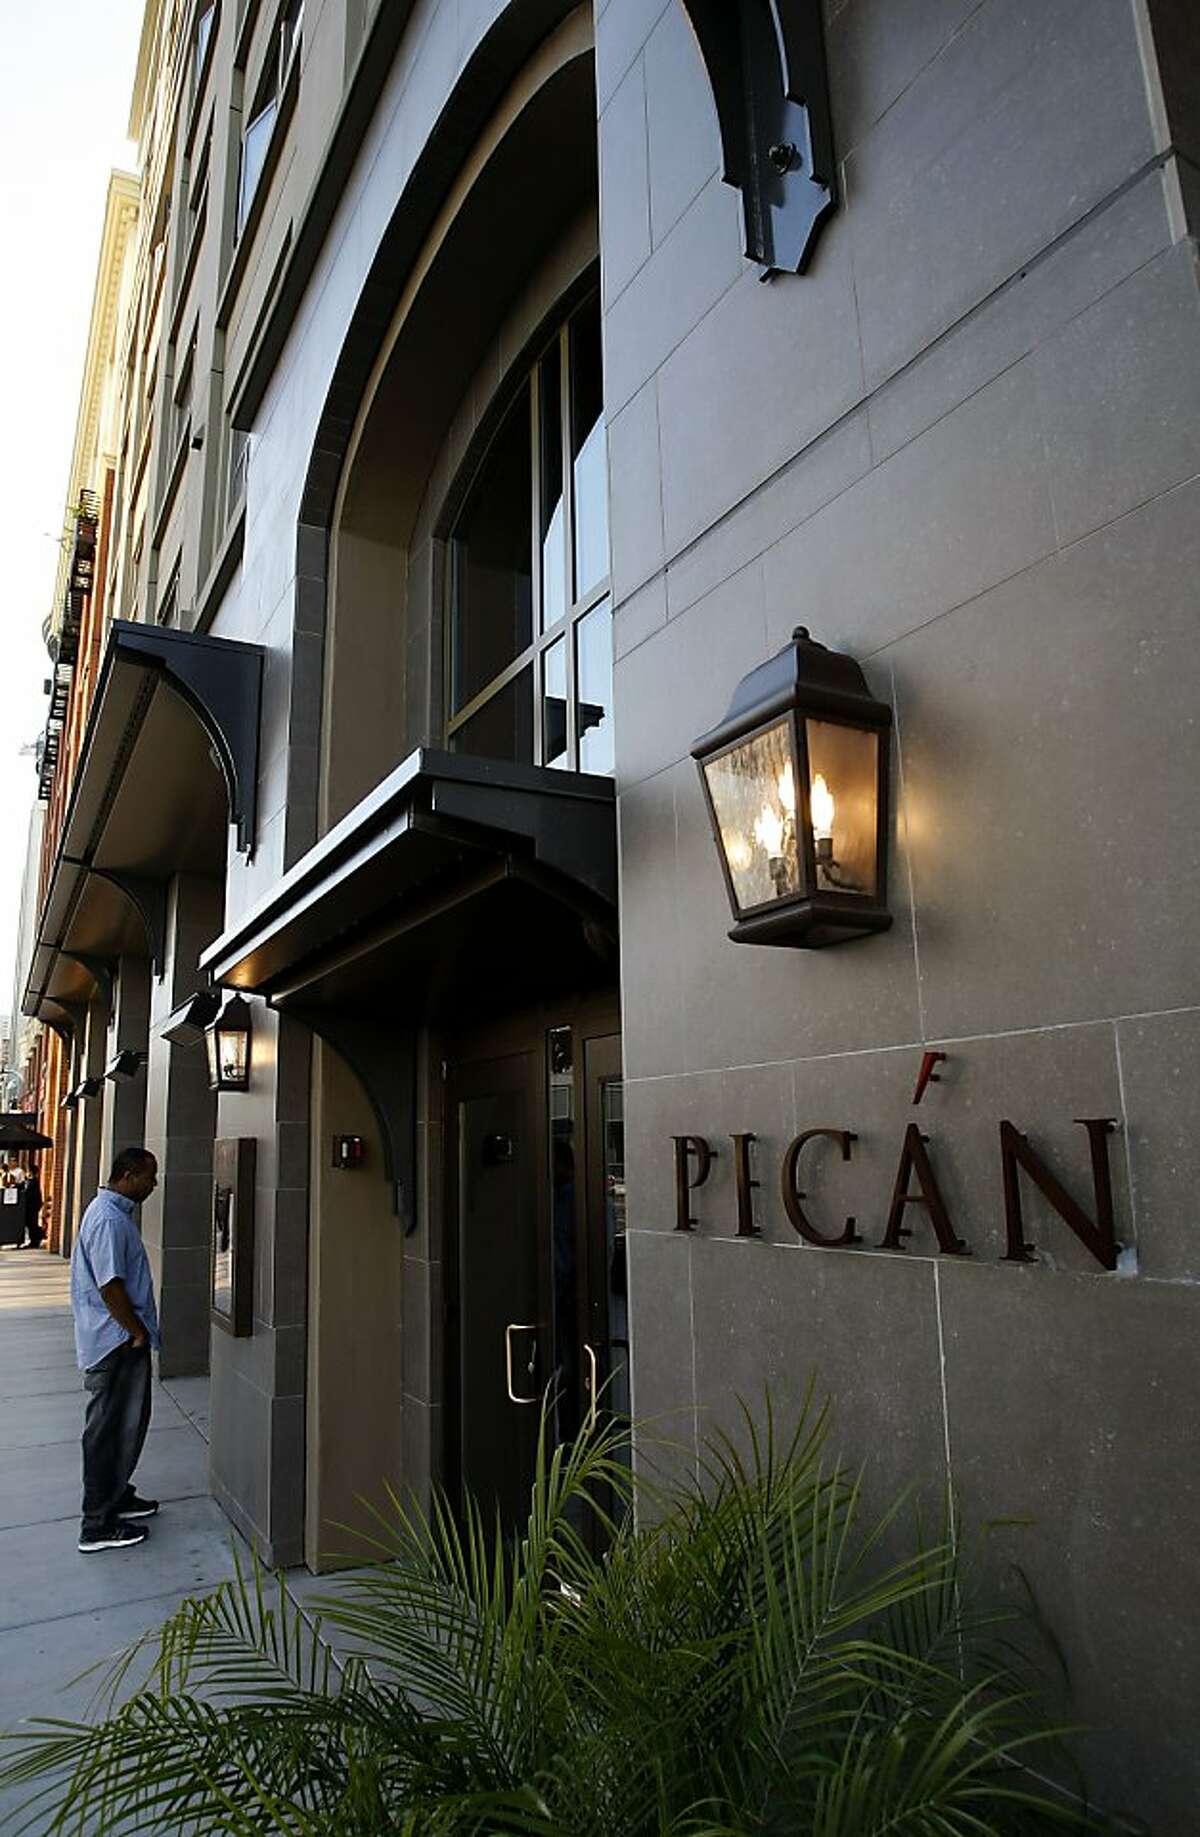 "Pican" a taste of the south, restaurant, on Broadway in downtown Oakland, Calif., on Tuesday March 24, 2009.